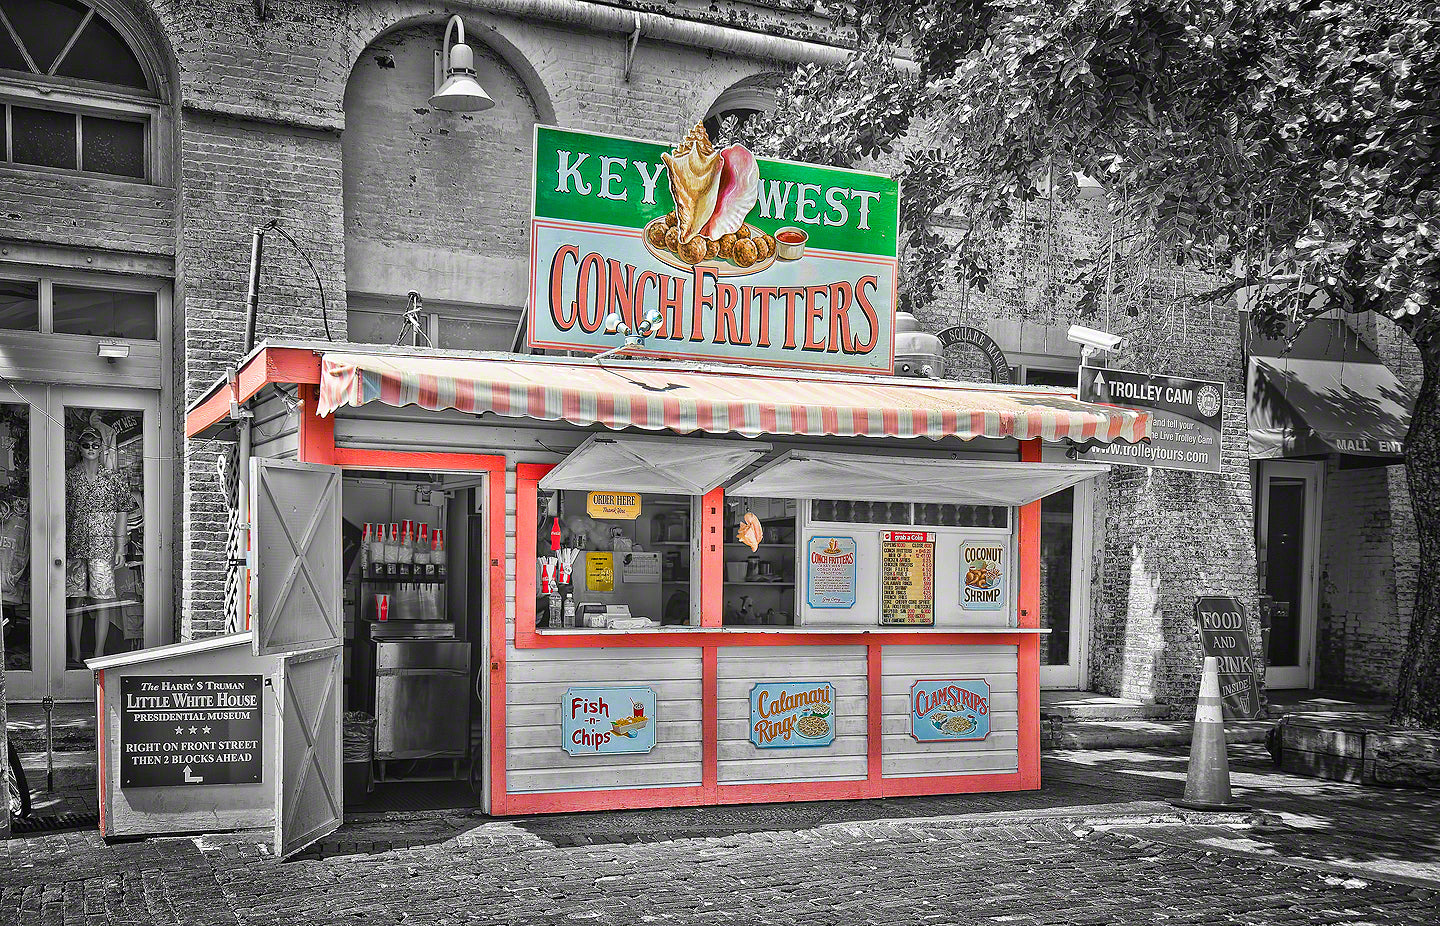 A photo of a colorful conch fritter stand in Key West, Florida